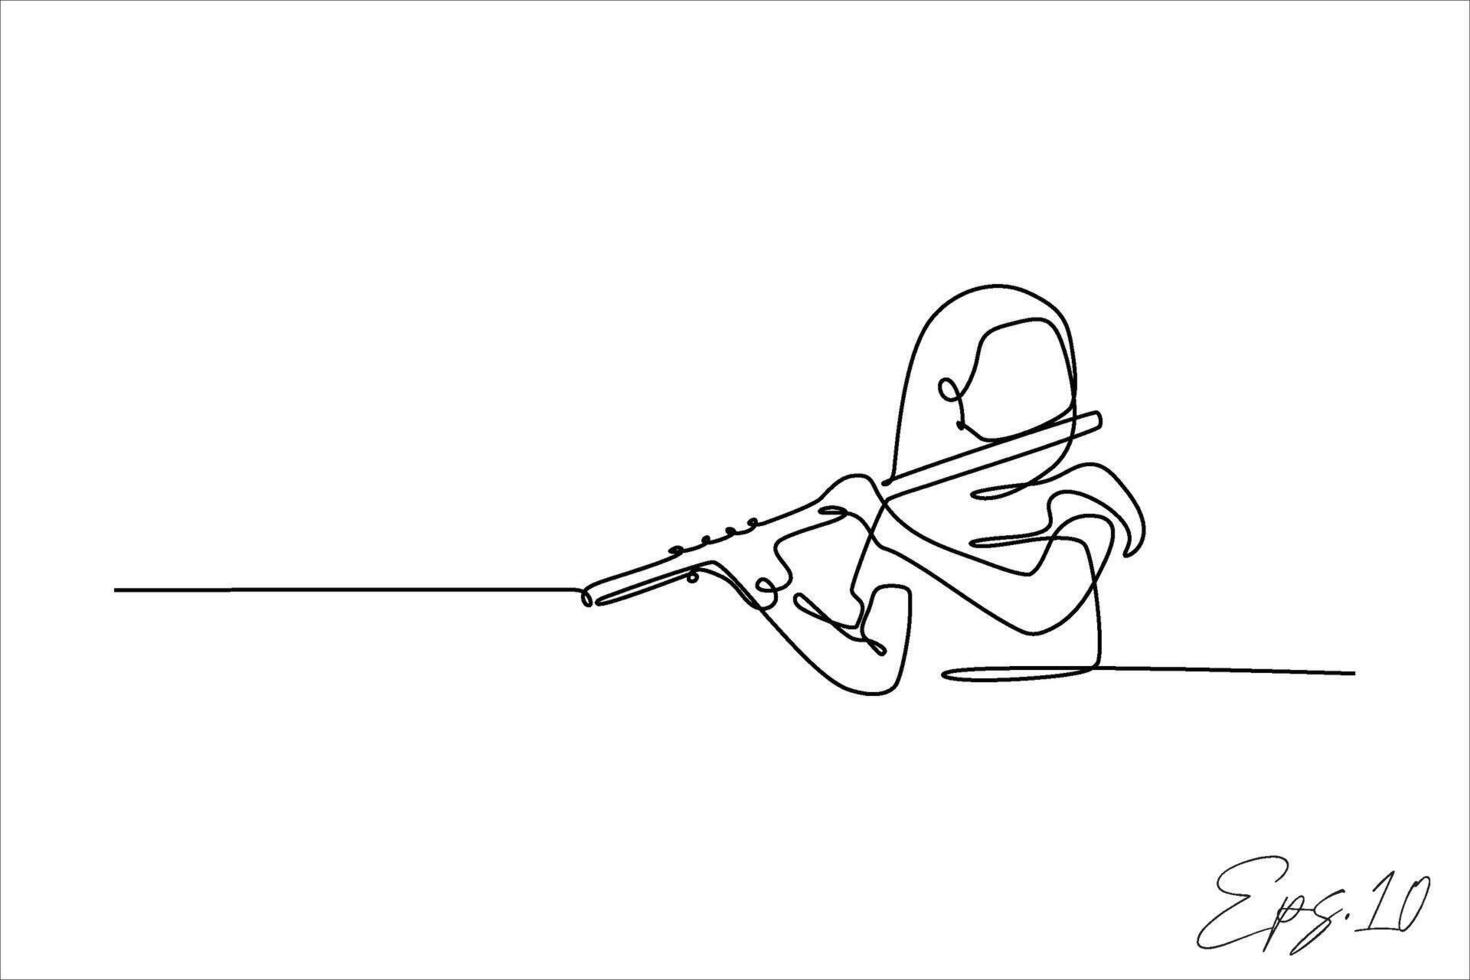 continuous line vector illustration design of woman playing the flute